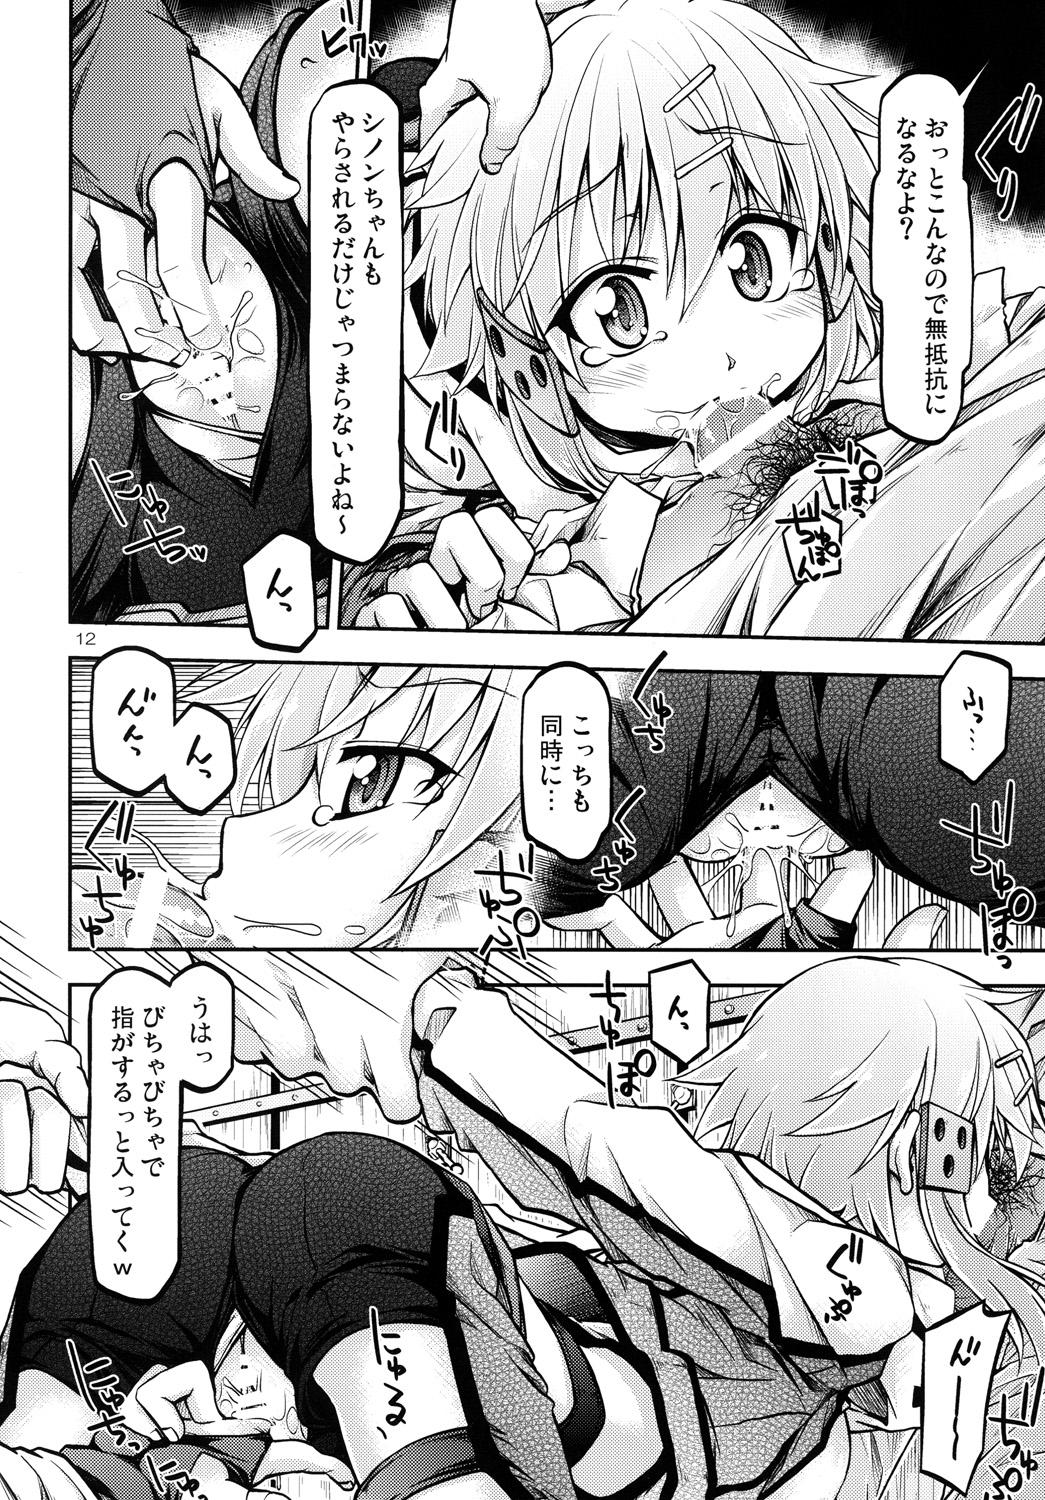 Squirting Gspot - Sword art online 3some - Page 11